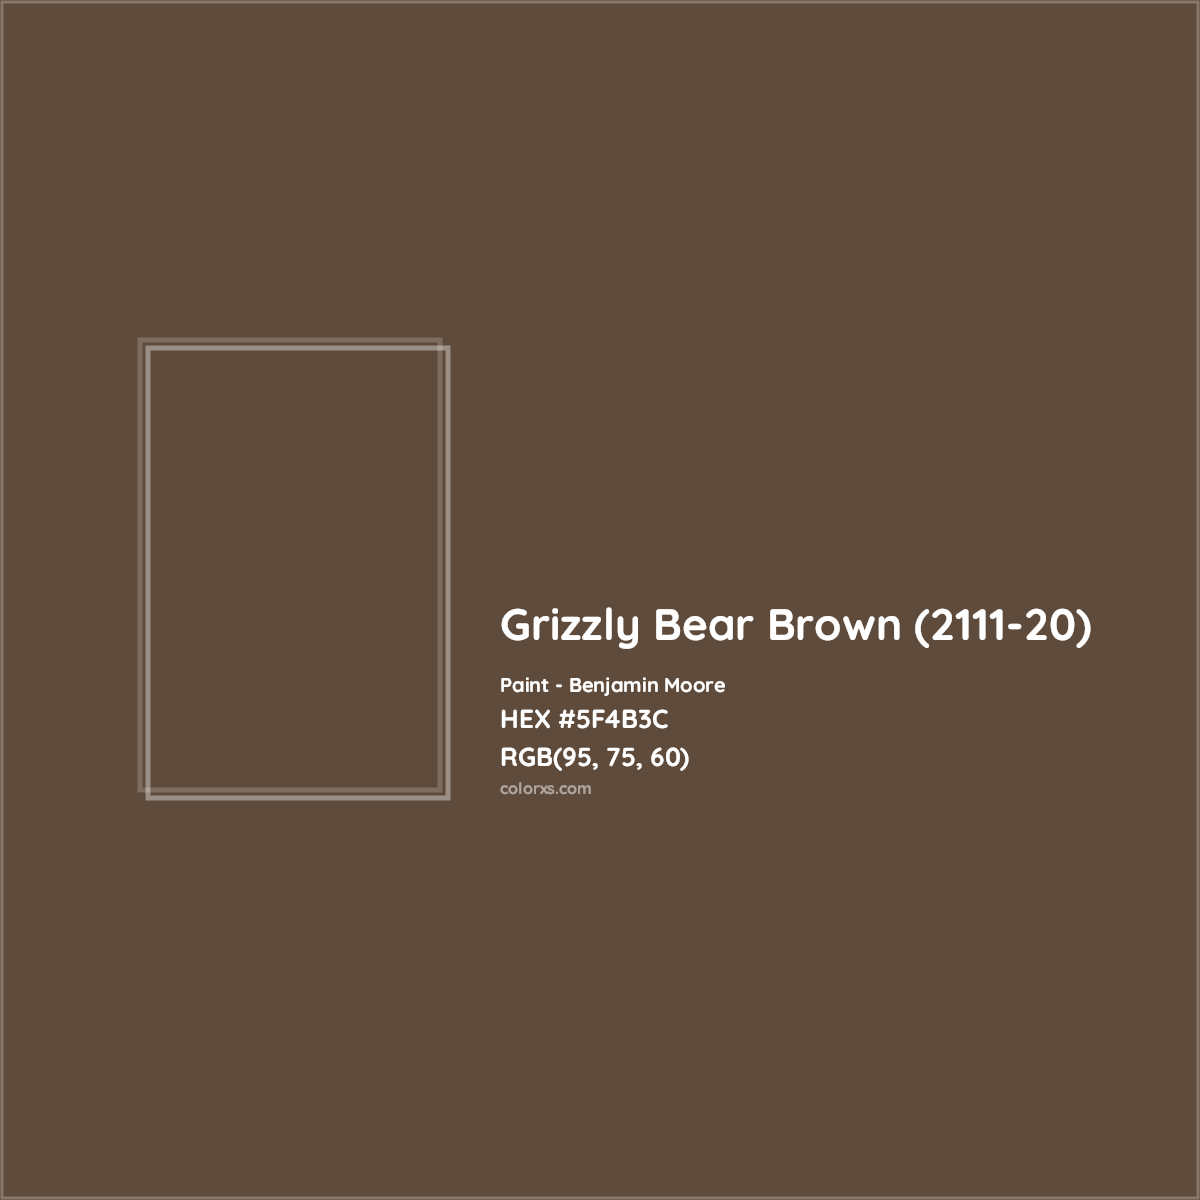 HEX #5F4B3C Grizzly Bear Brown (2111-20) Paint Benjamin Moore - Color Code